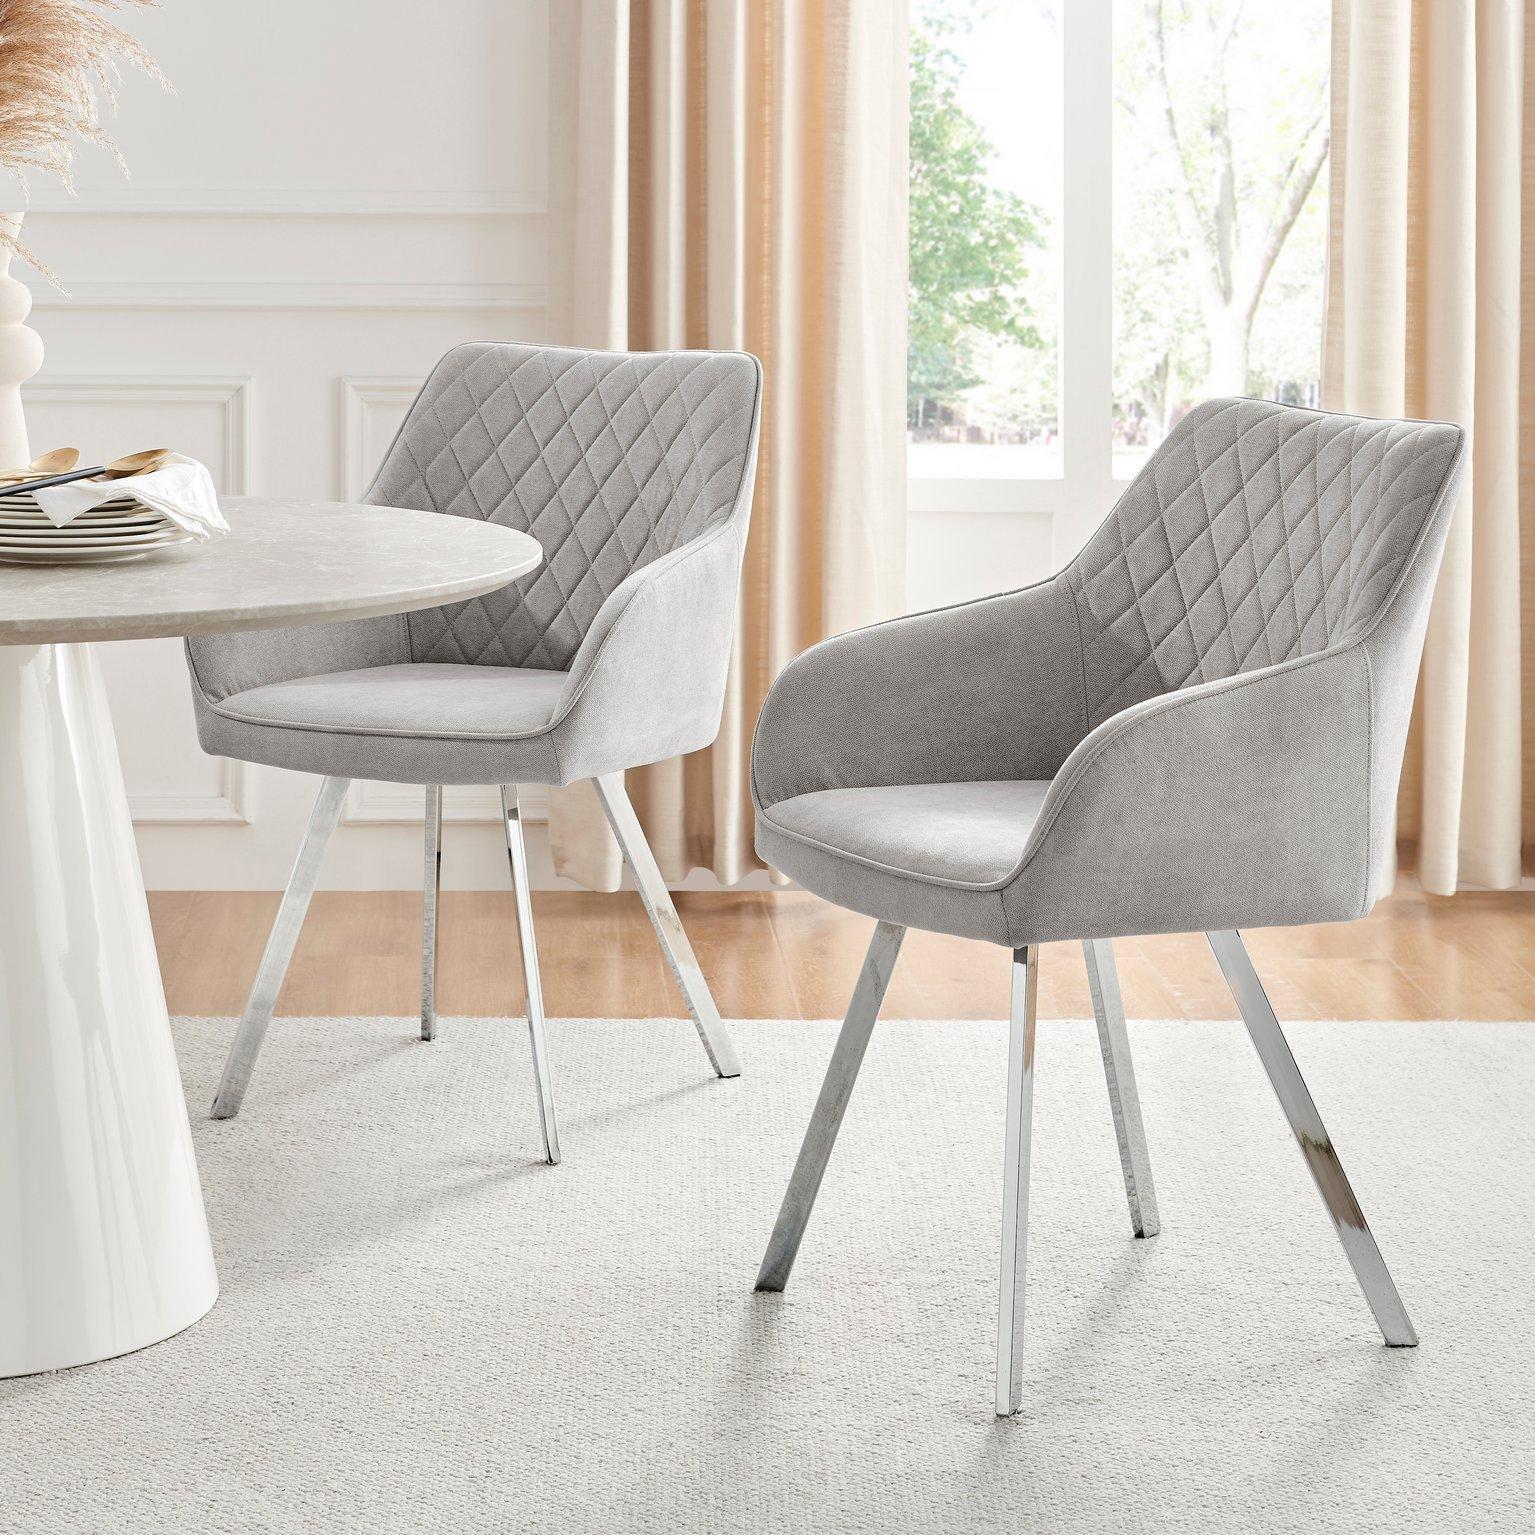 Set of 2 Falun Deep Padded Dining Chairs Upholstered in Soft & Durable Fabric With Silver Chrome Leg